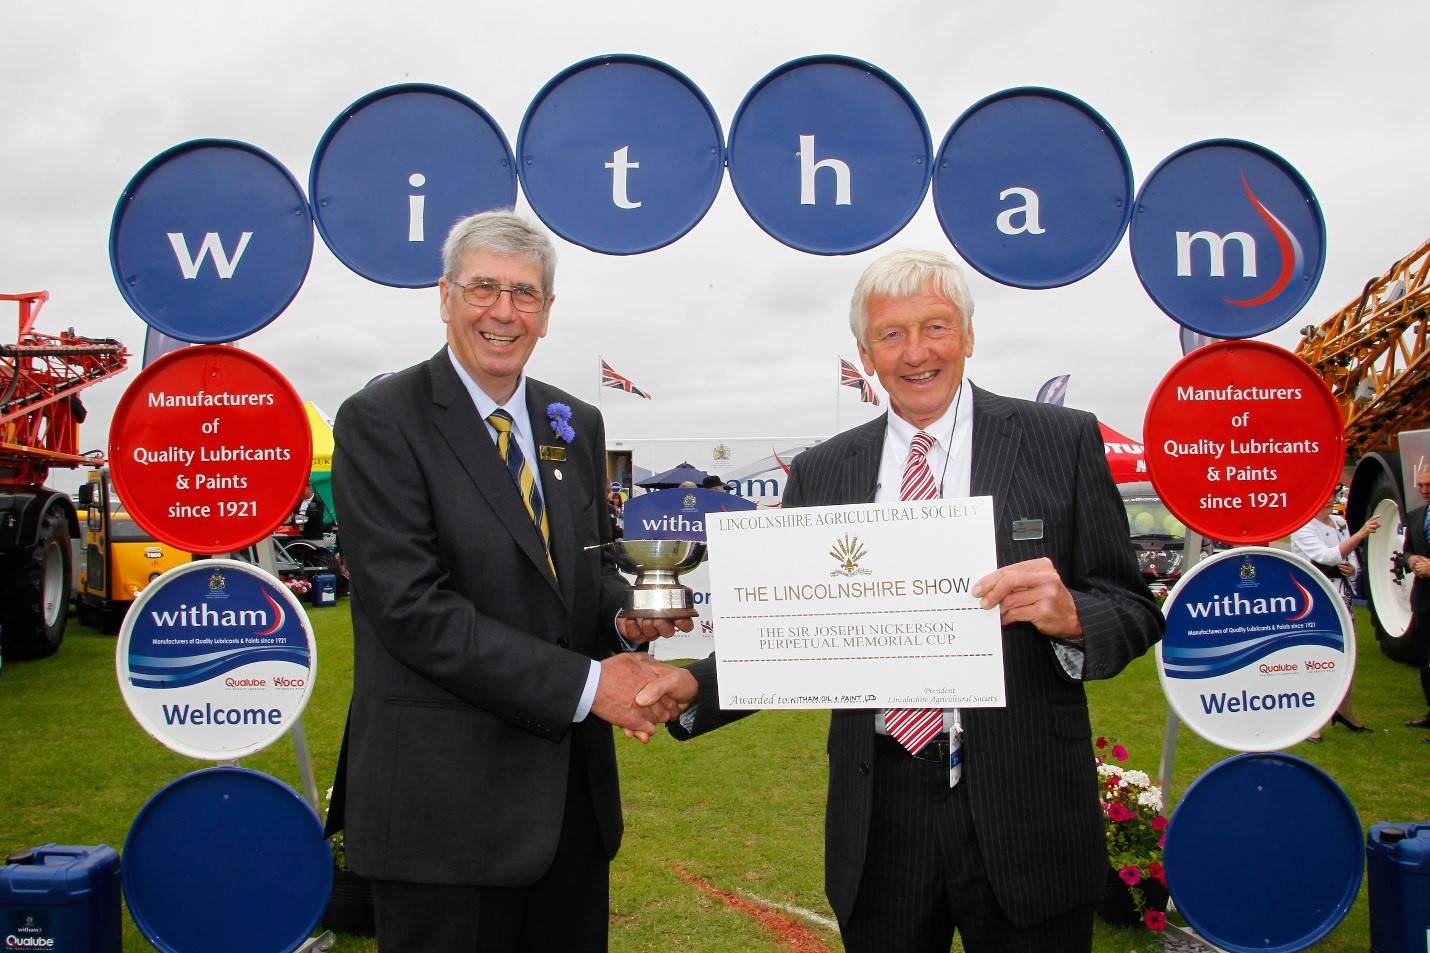 Geoff and Witham at the Lincolnshire Show in 2014.